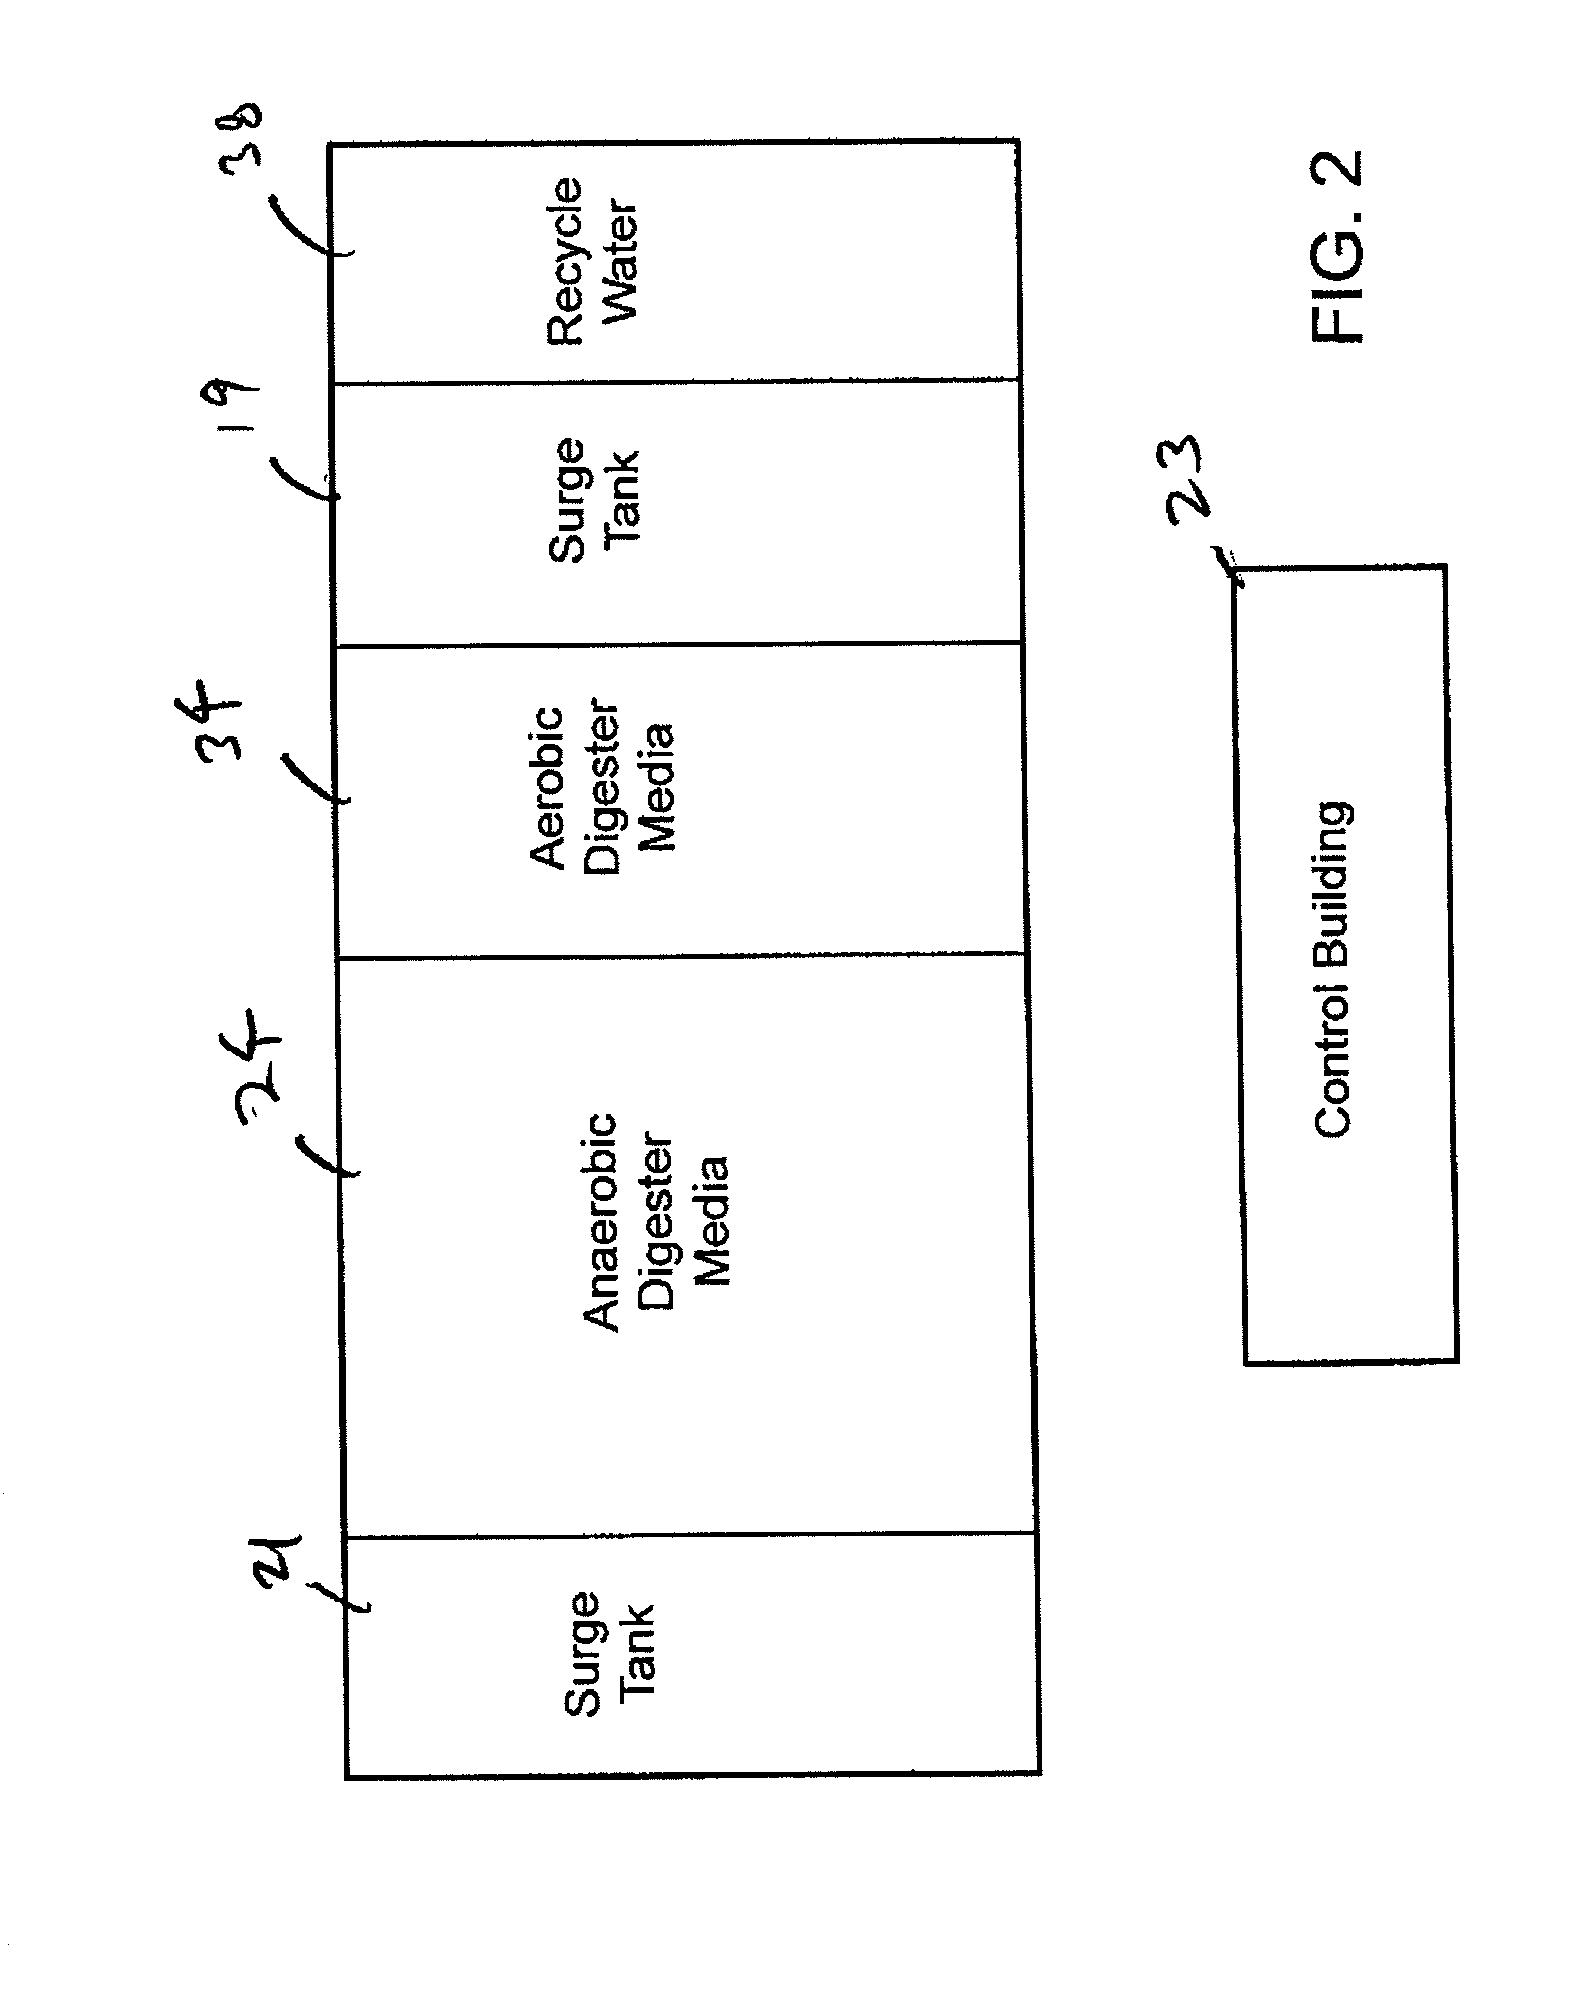 Method and Apparatus for Producing Engineered Fuel from High Cellulose Feedstock